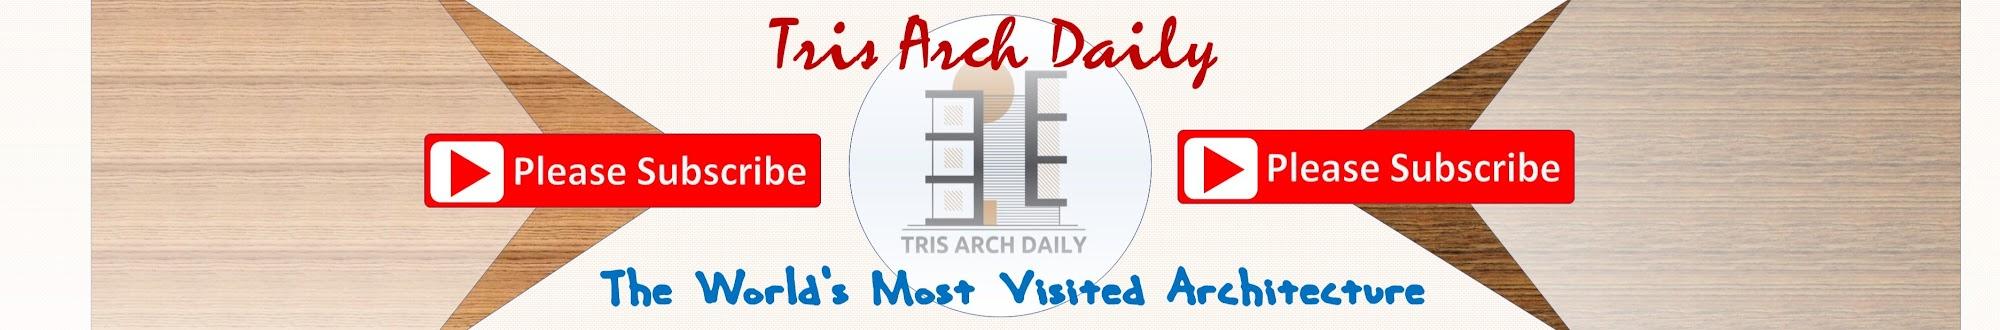 TrisArchDaily